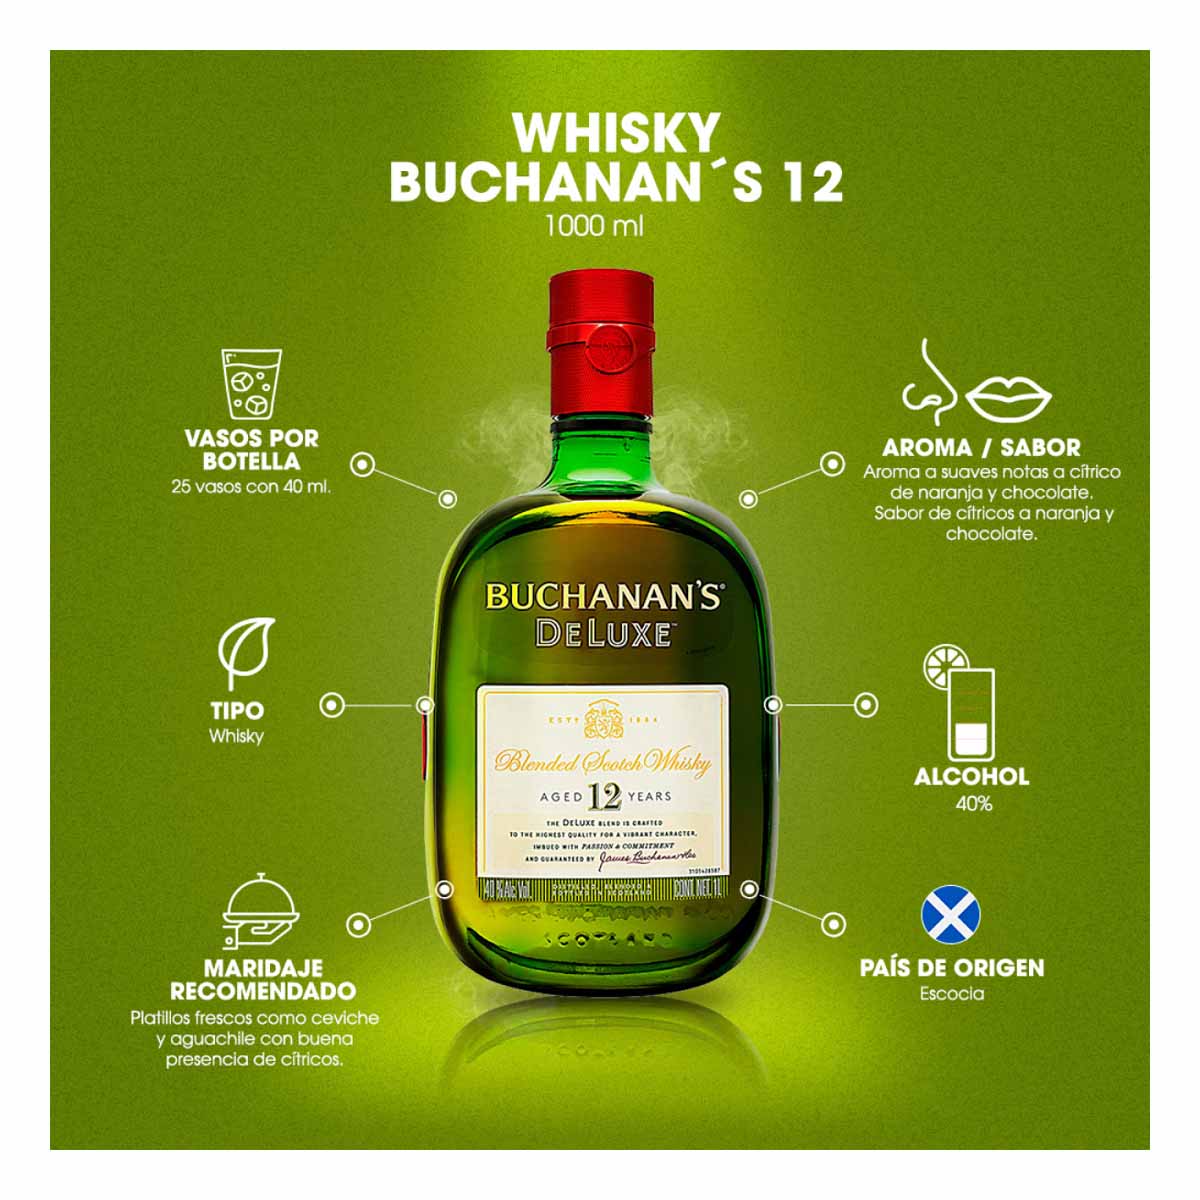 Whisky Buchanan's Deluxe 12 años Blended Scotch 750 ml